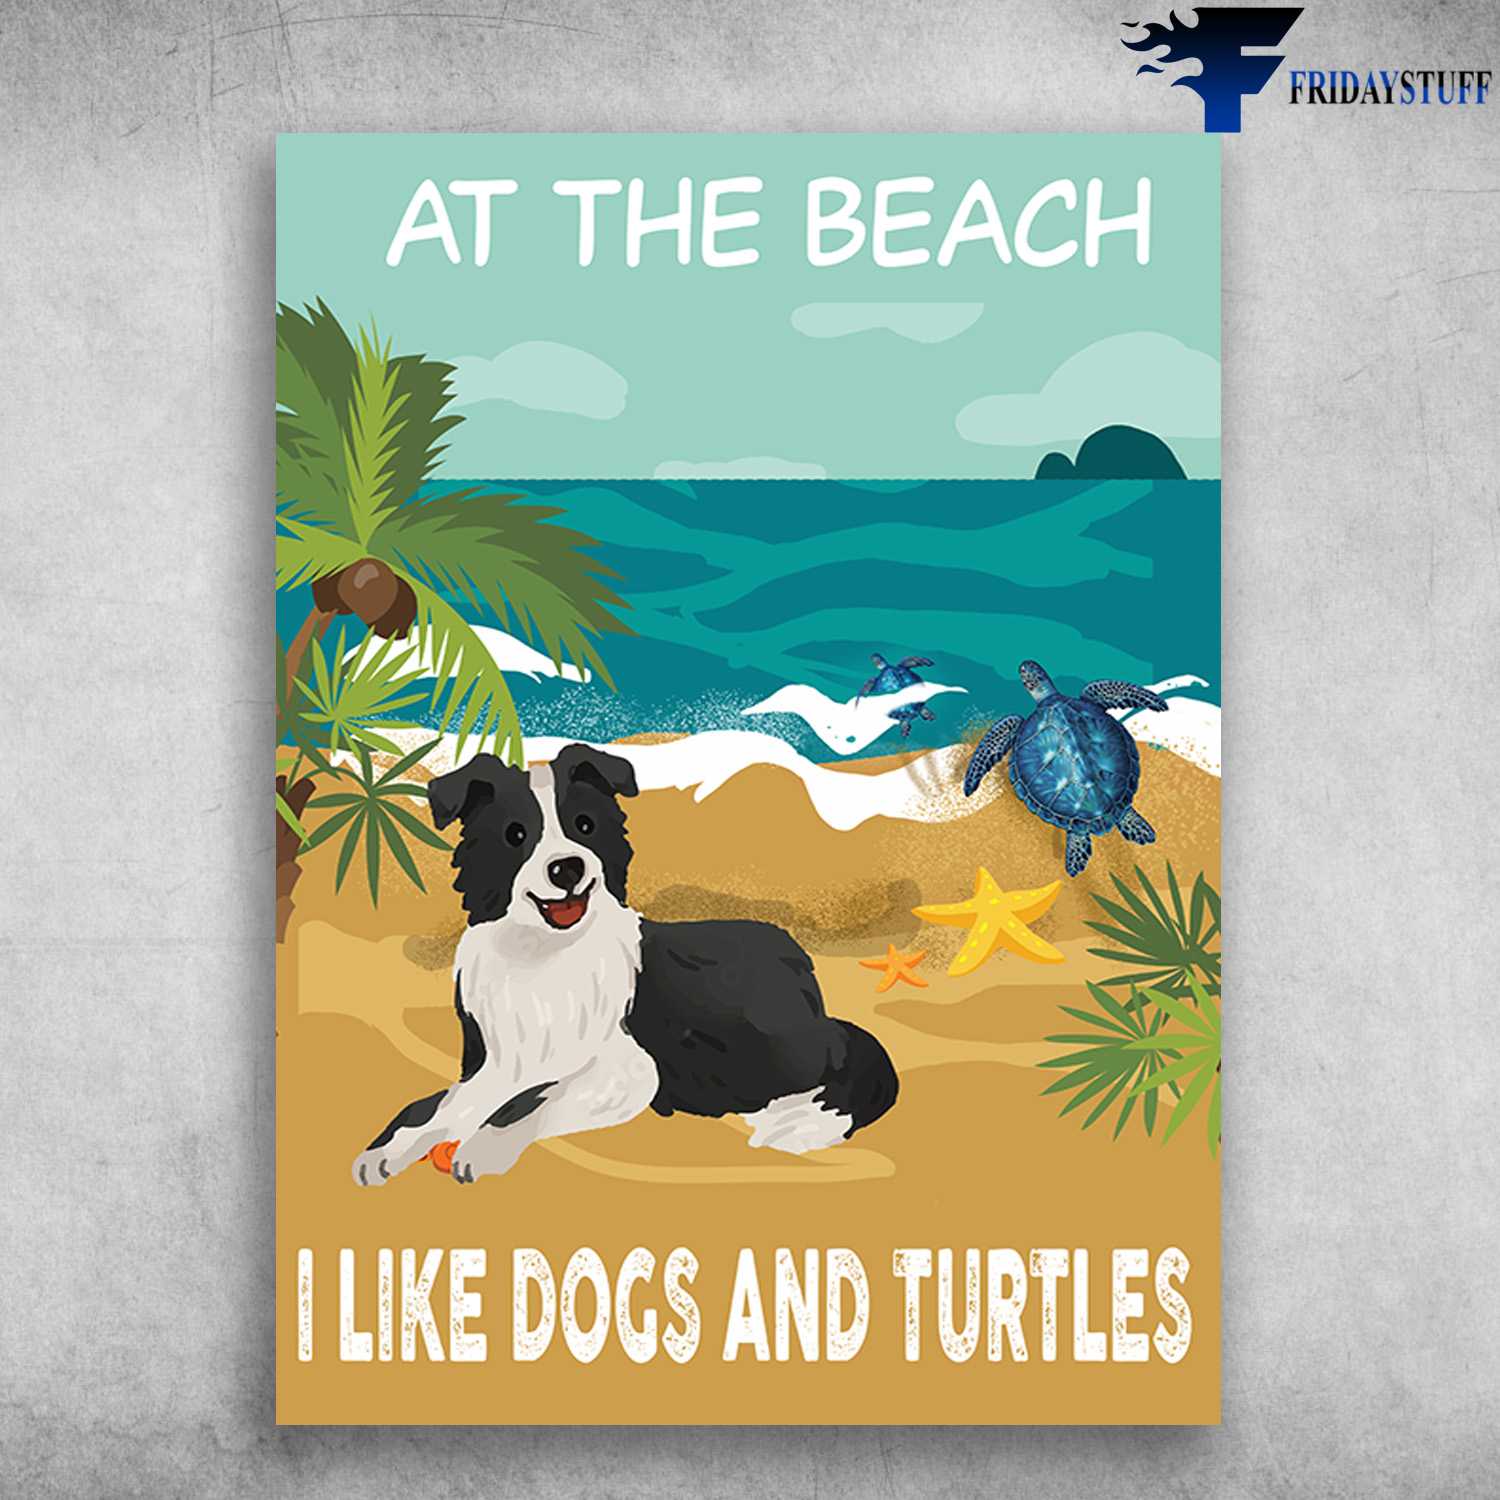 Border Collie, Beach Poster - At The Beach, I Like Dogs And Turtles, Turtle Beach